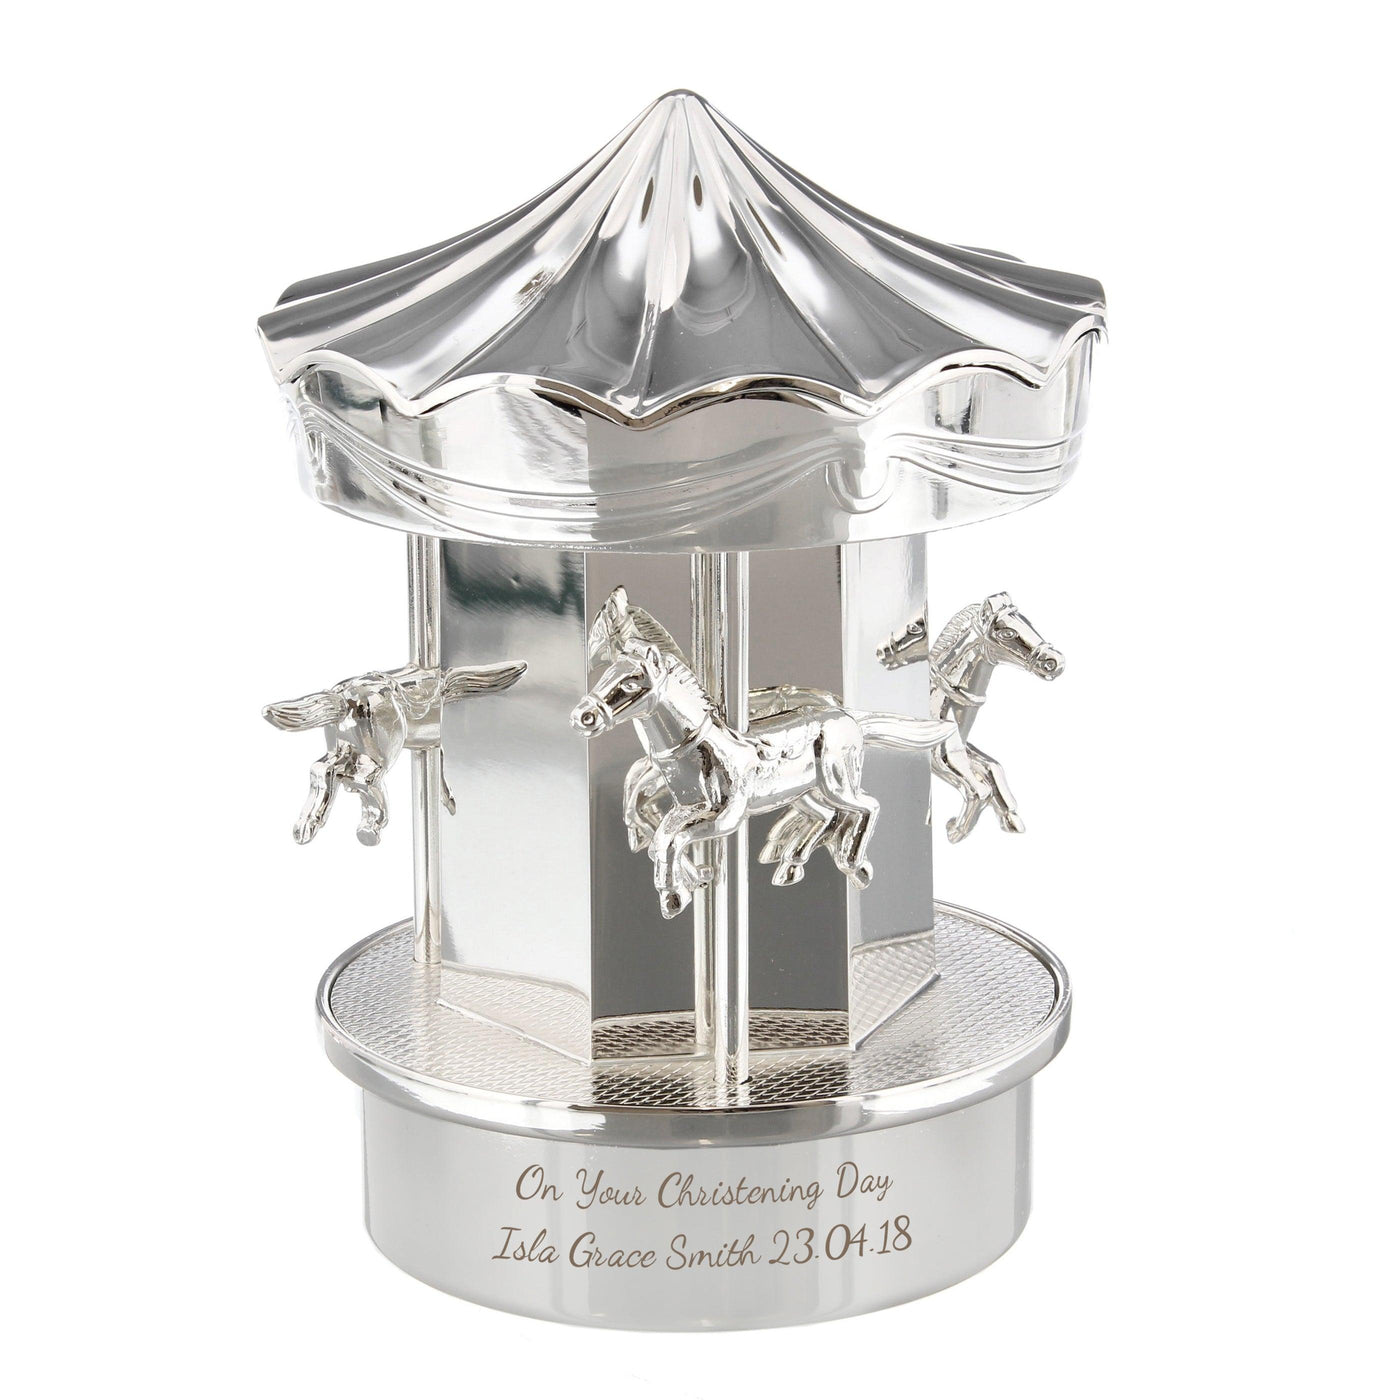 Personalised Silver Plated Carousel Money Box - Shop Personalised Gifts